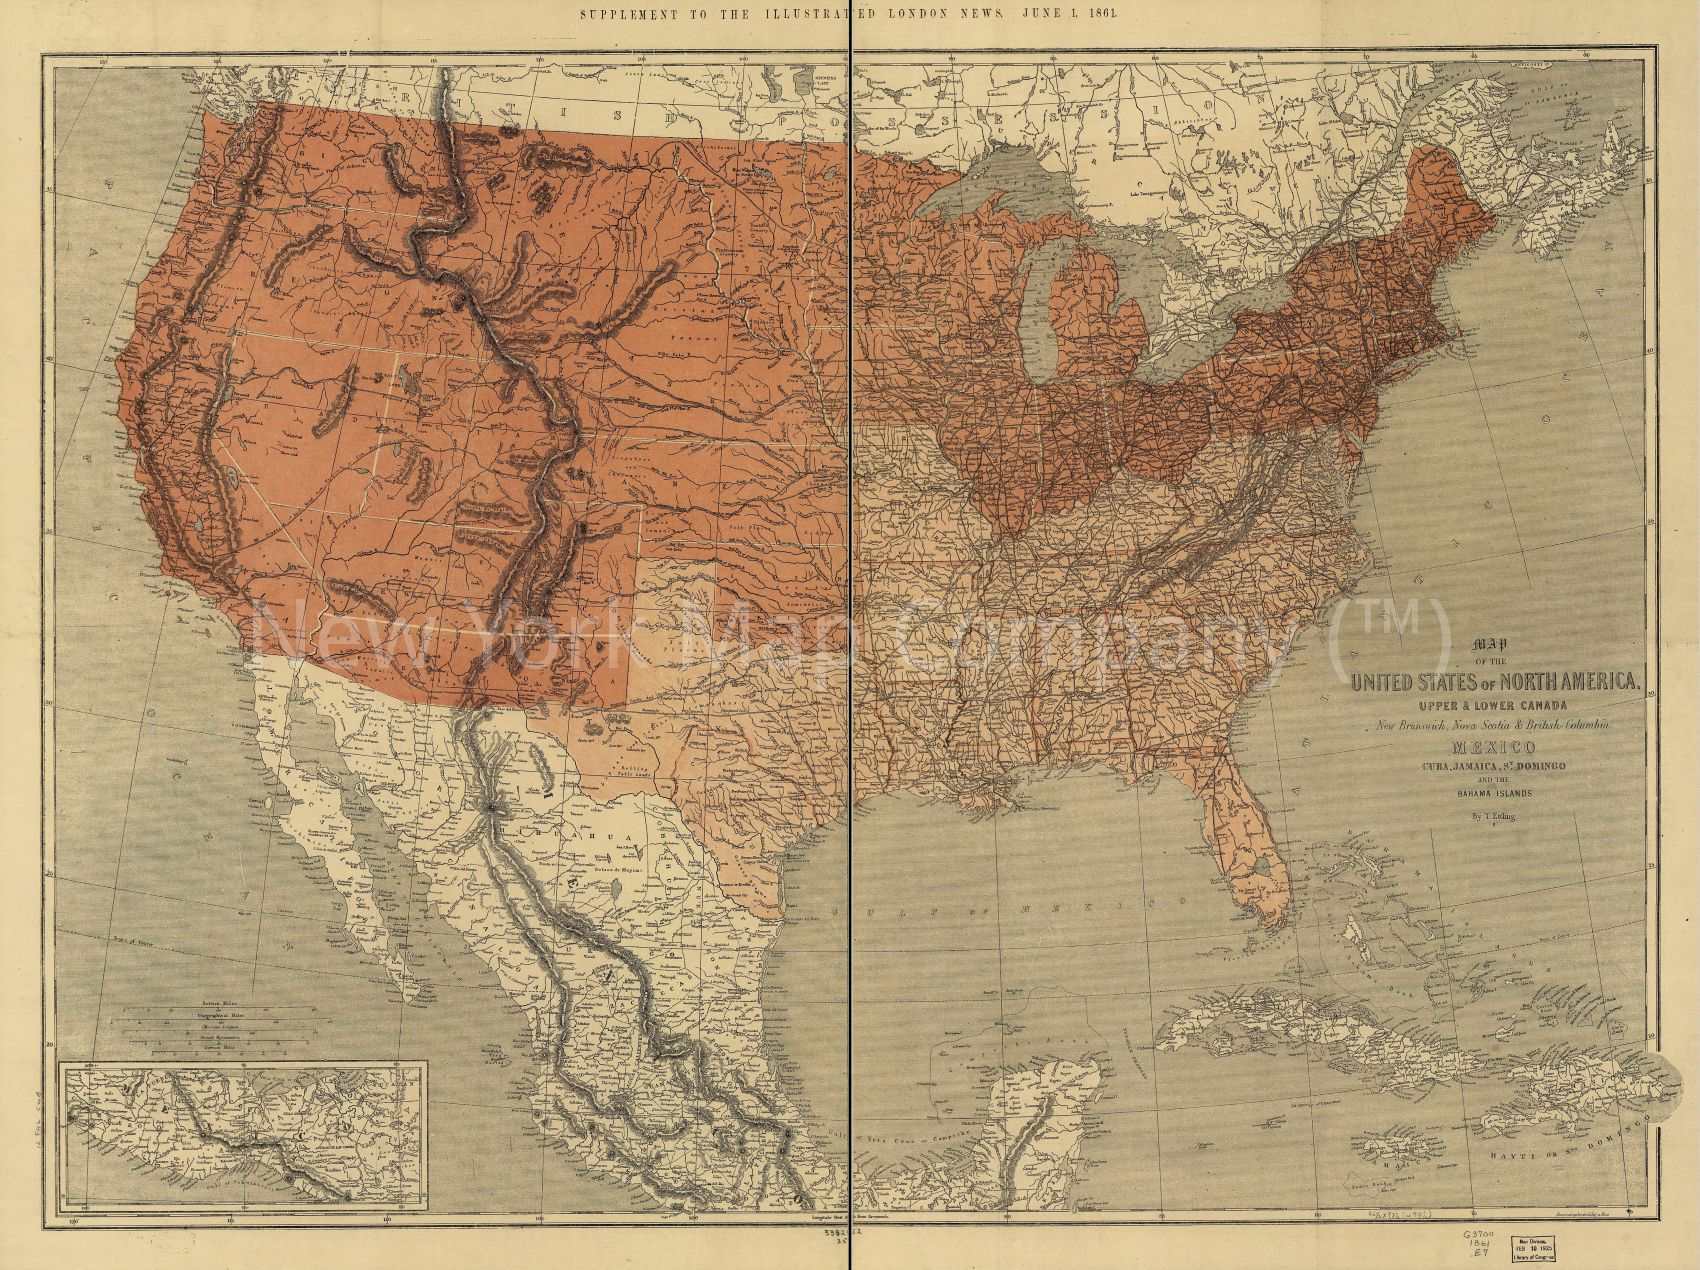 1861 MAP OF the United States of North America | Vintage North America ...